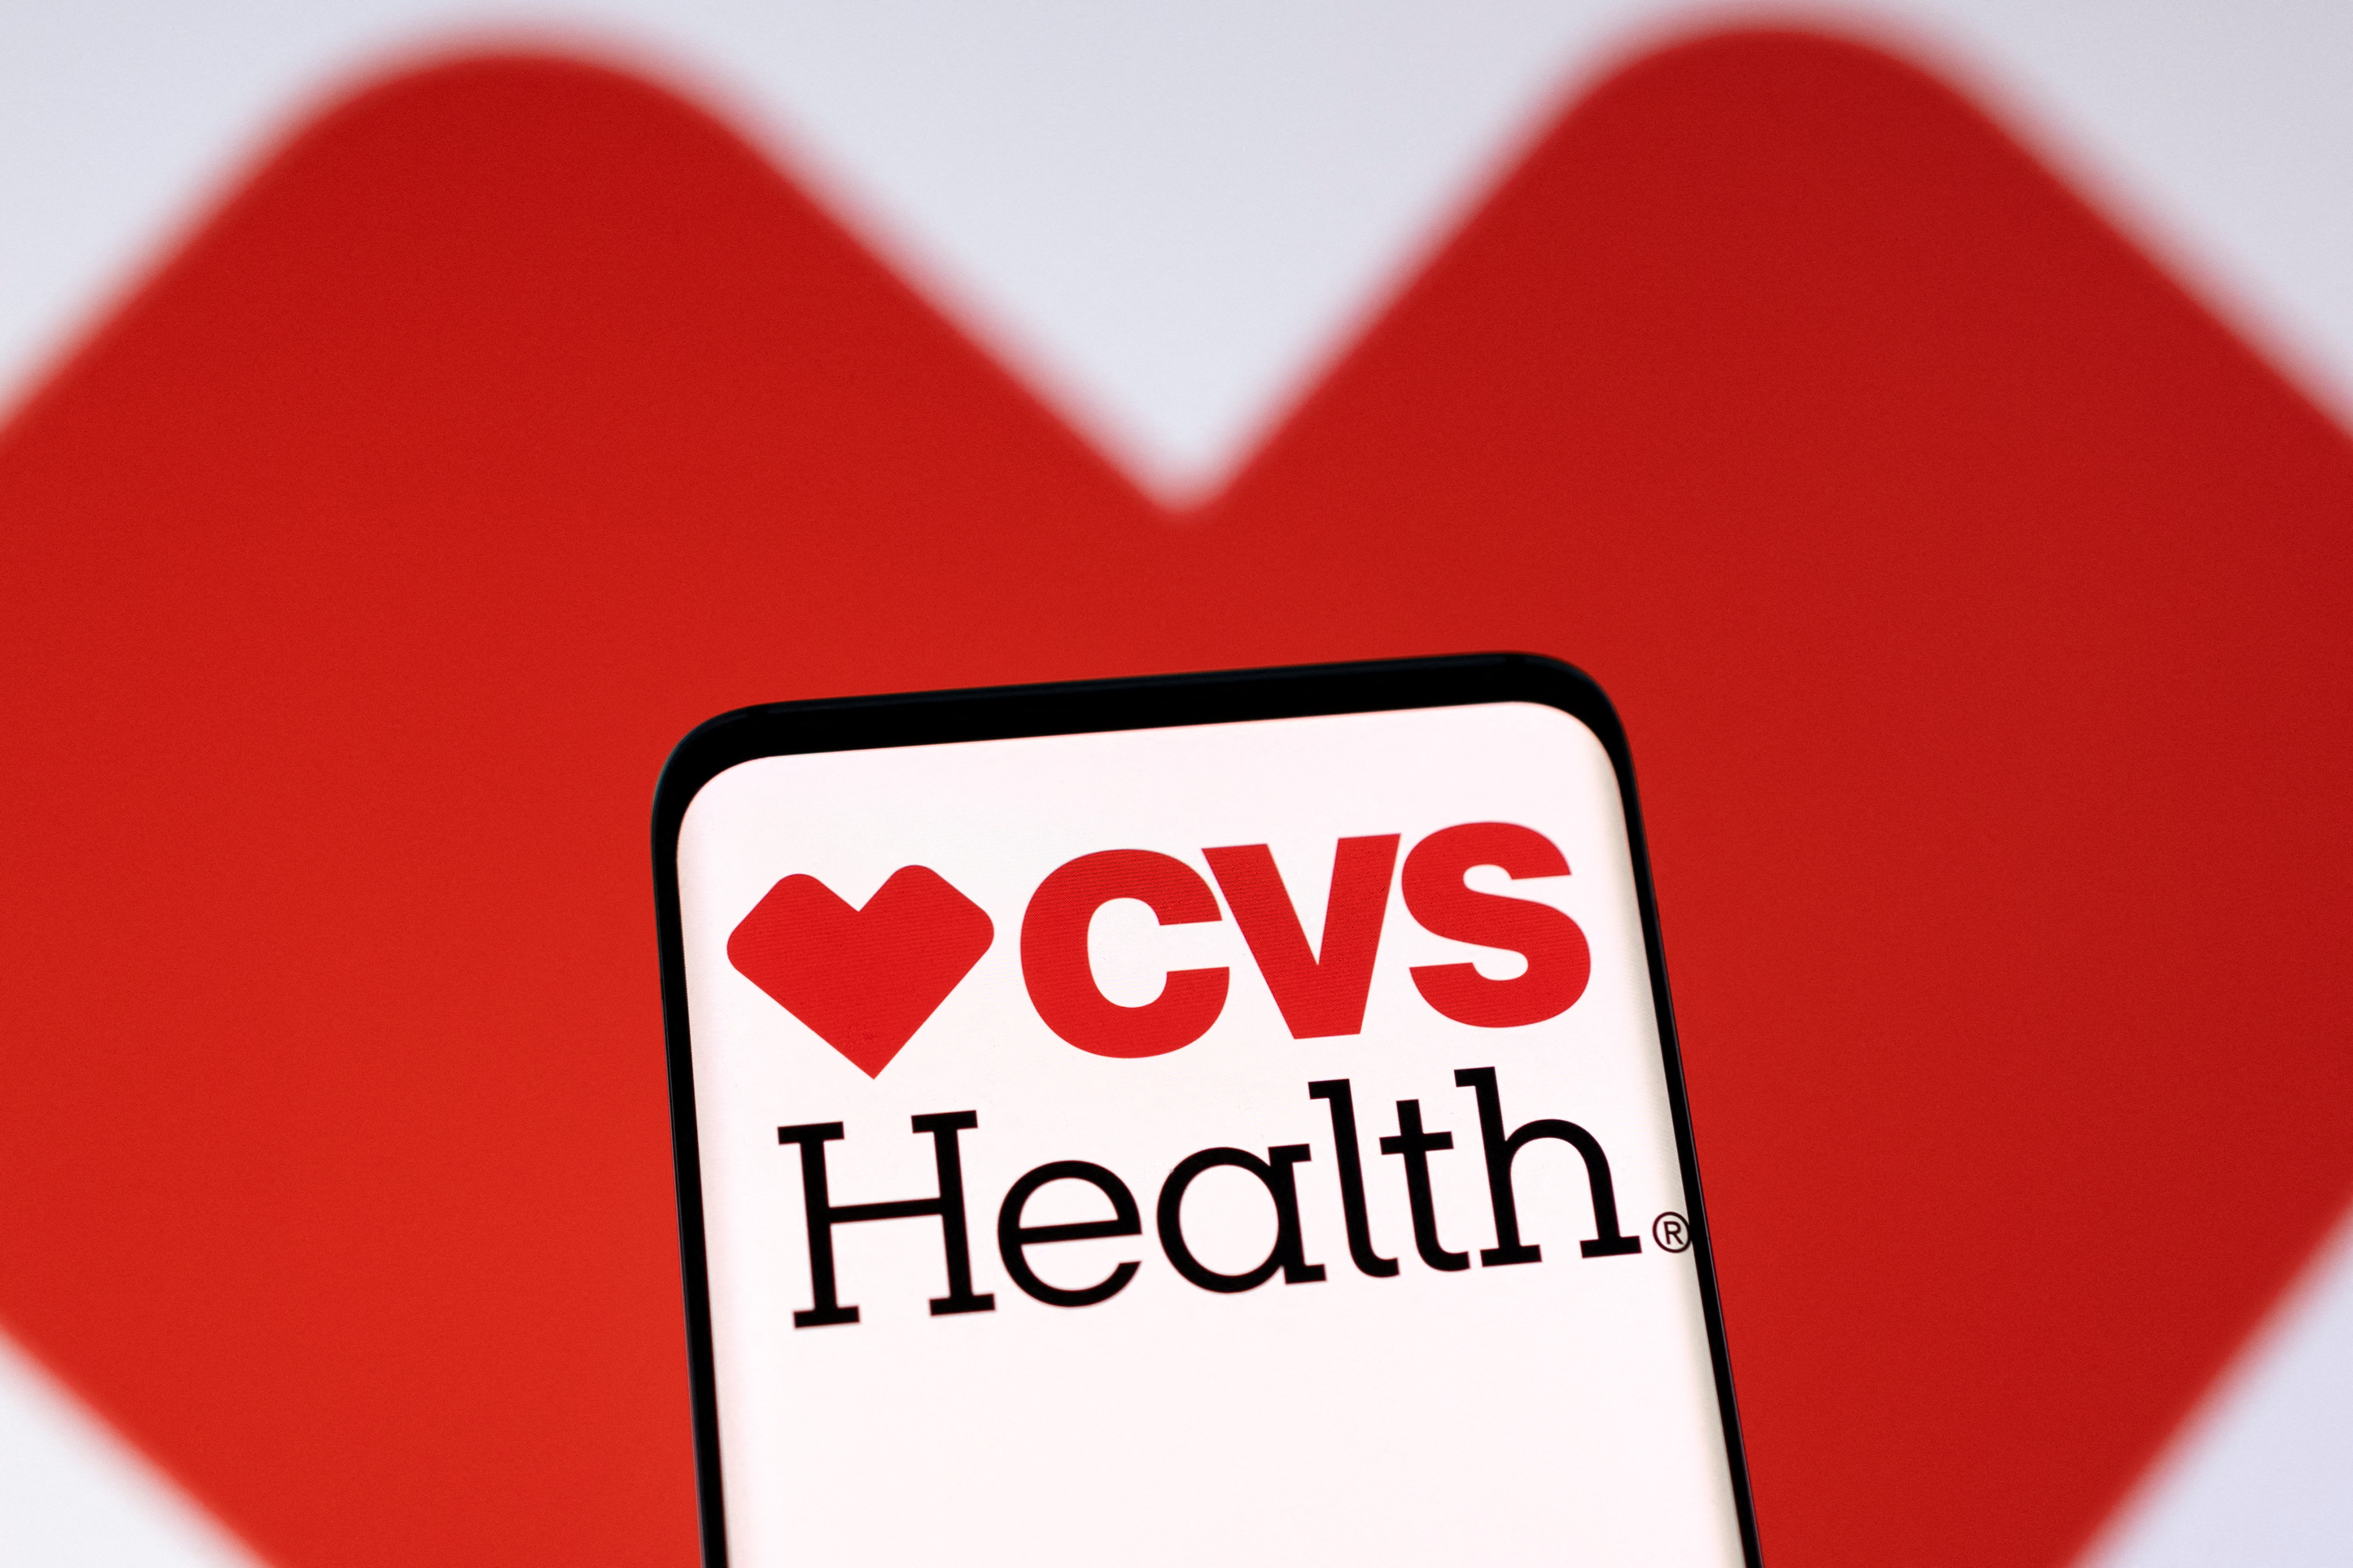 Cvs health carefirst policy for kids